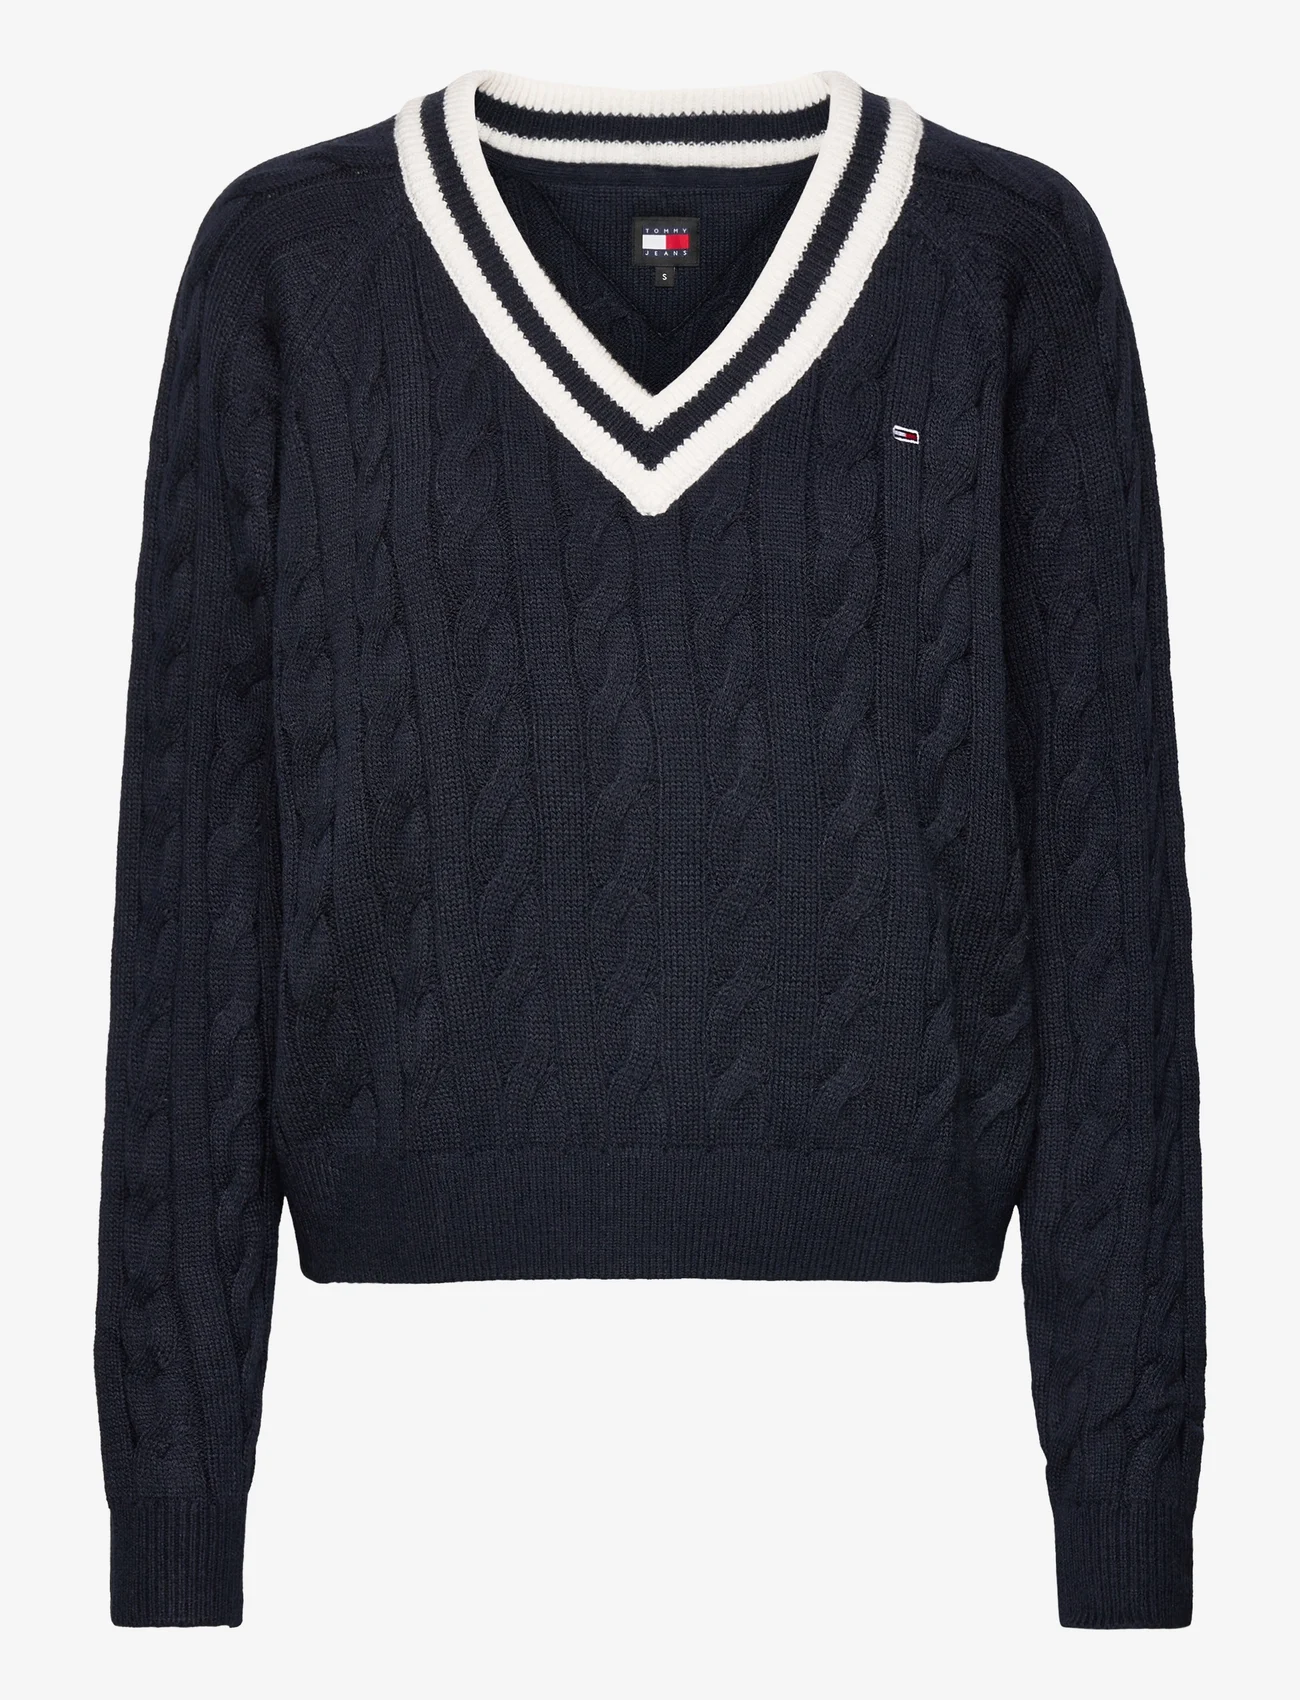 Tommy Jeans - TJW V-NECK CABLE SWEATER - sweaters - dark night navy - 0